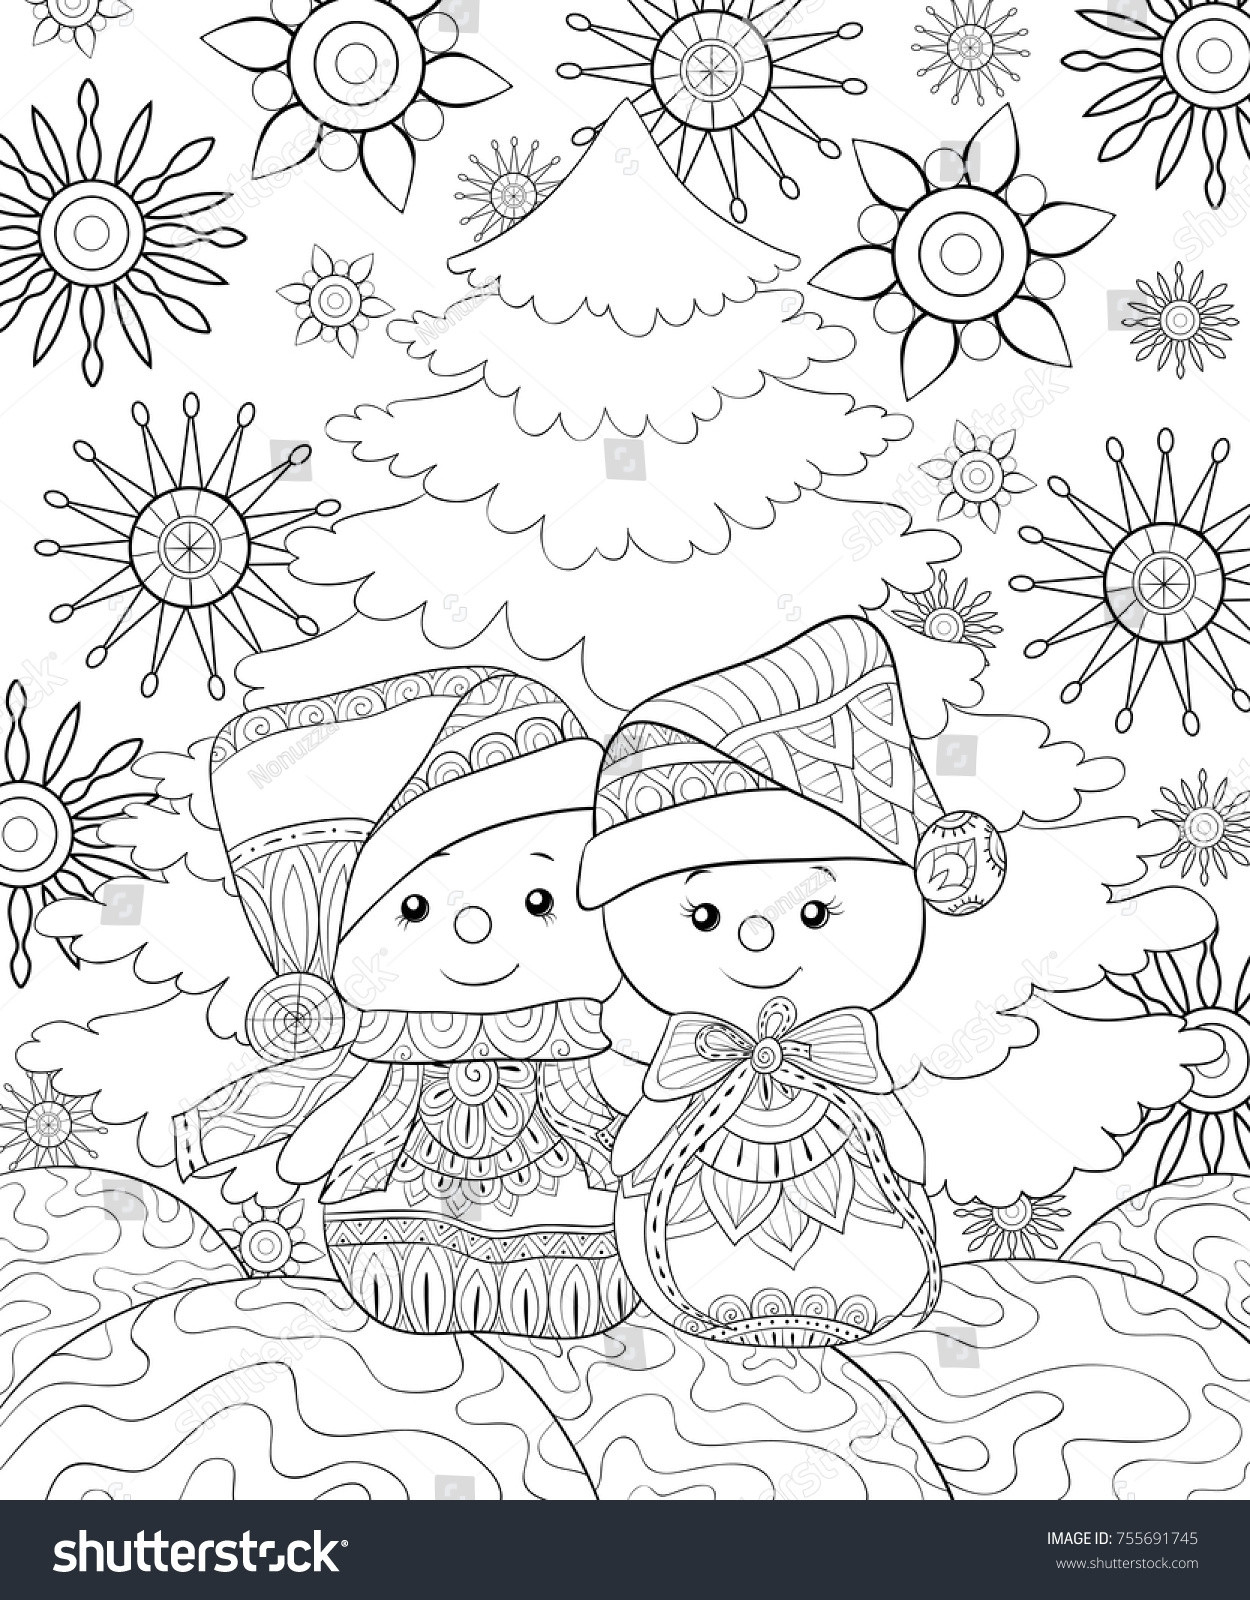 Snowman Coloring Pages For Adults
 Christmas Snowflake Coloring Pages Printable Free